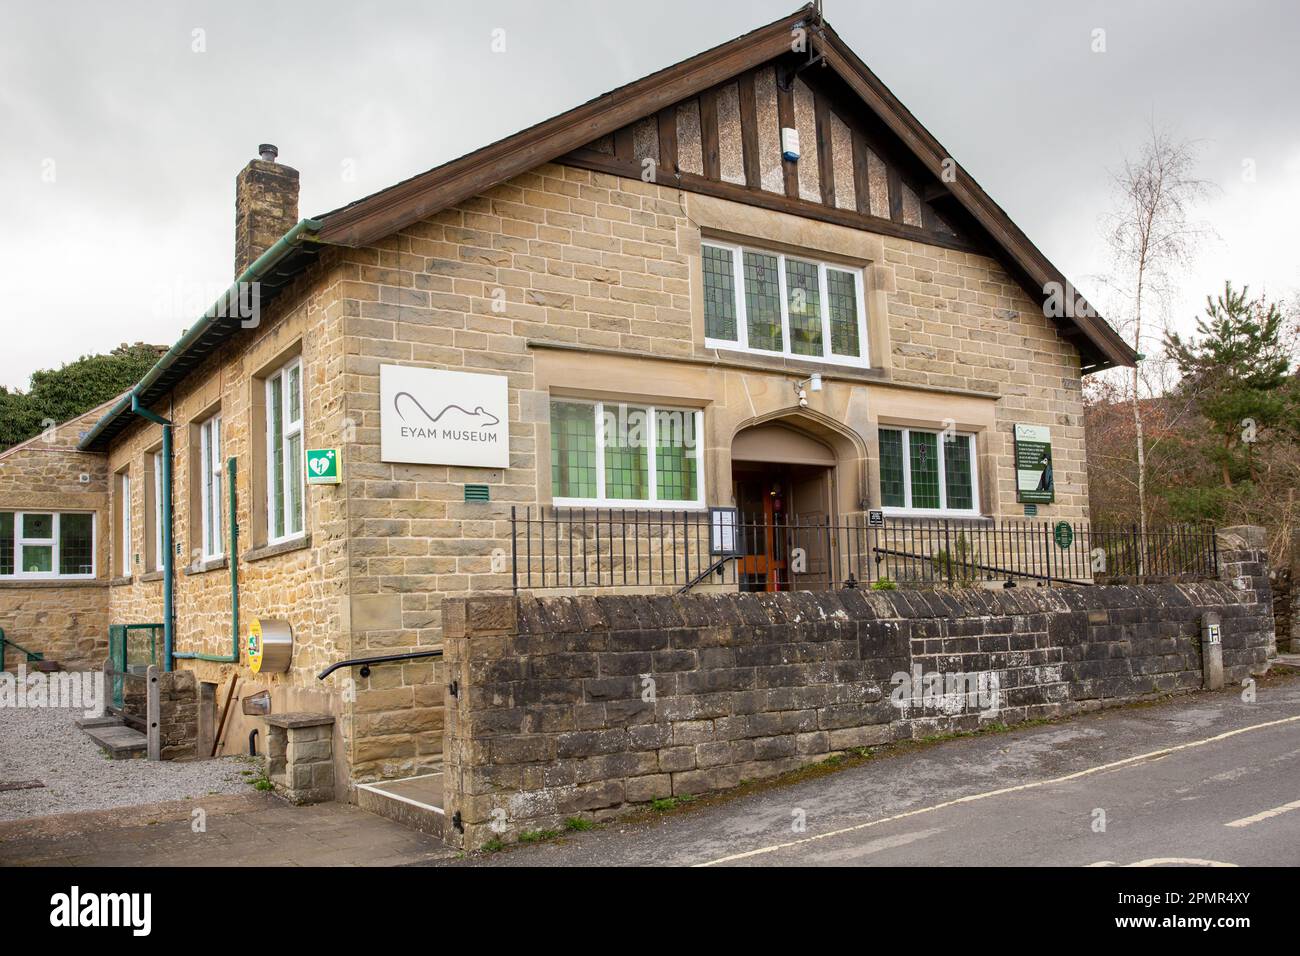 The plague museum in the Derbyshire Peak District  plague village of Eyam England Stock Photo